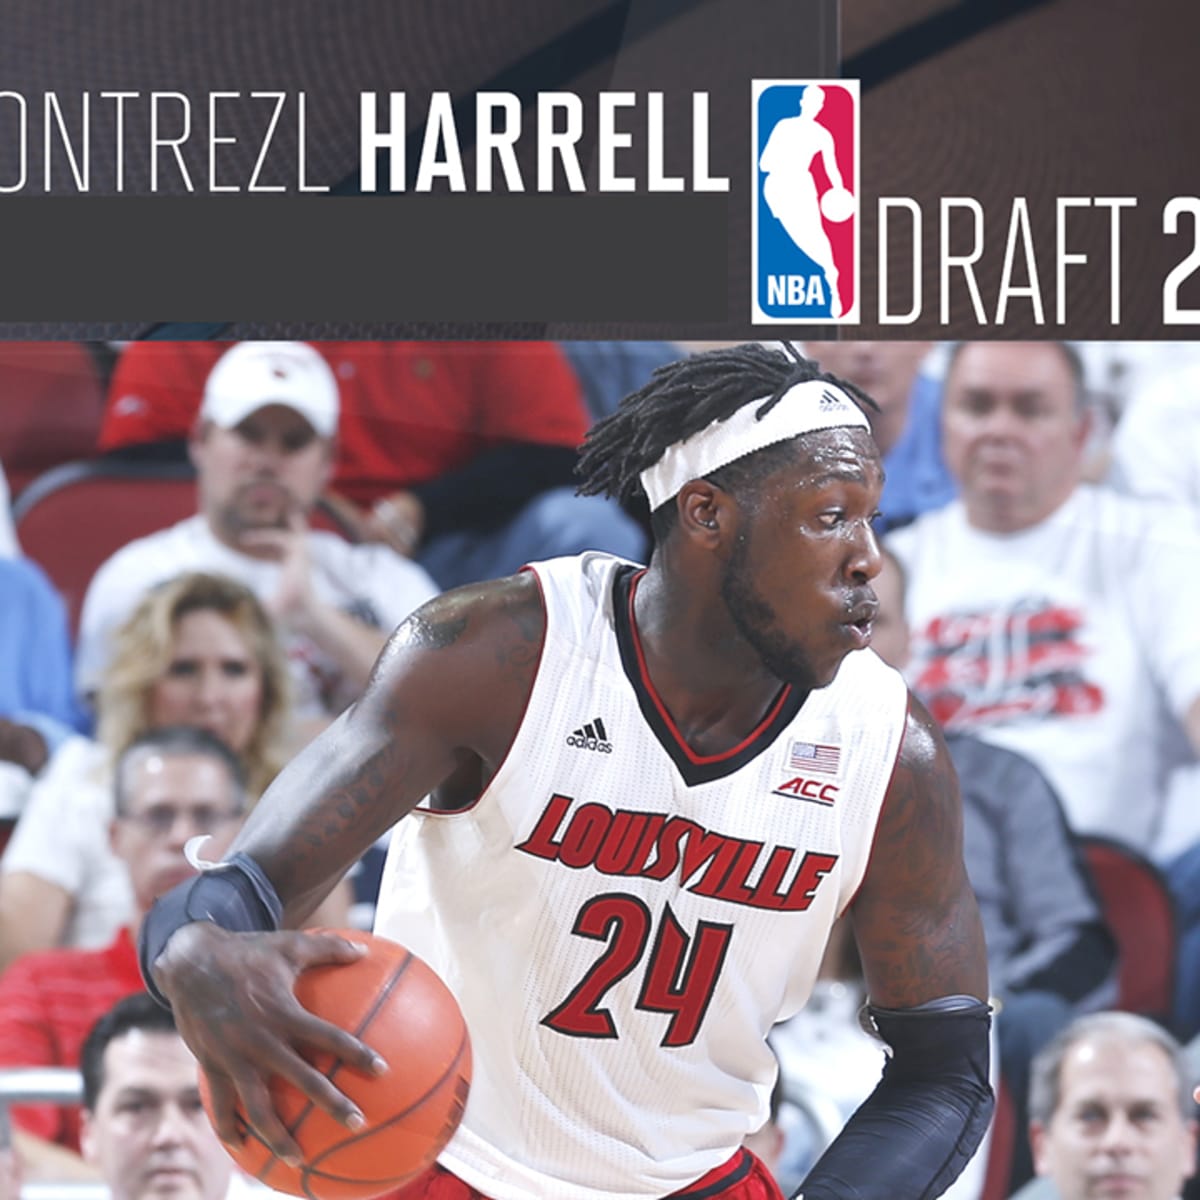 DraftExpress - Montrezl Harrell DraftExpress Profile: Stats, Comparisons,  and Outlook